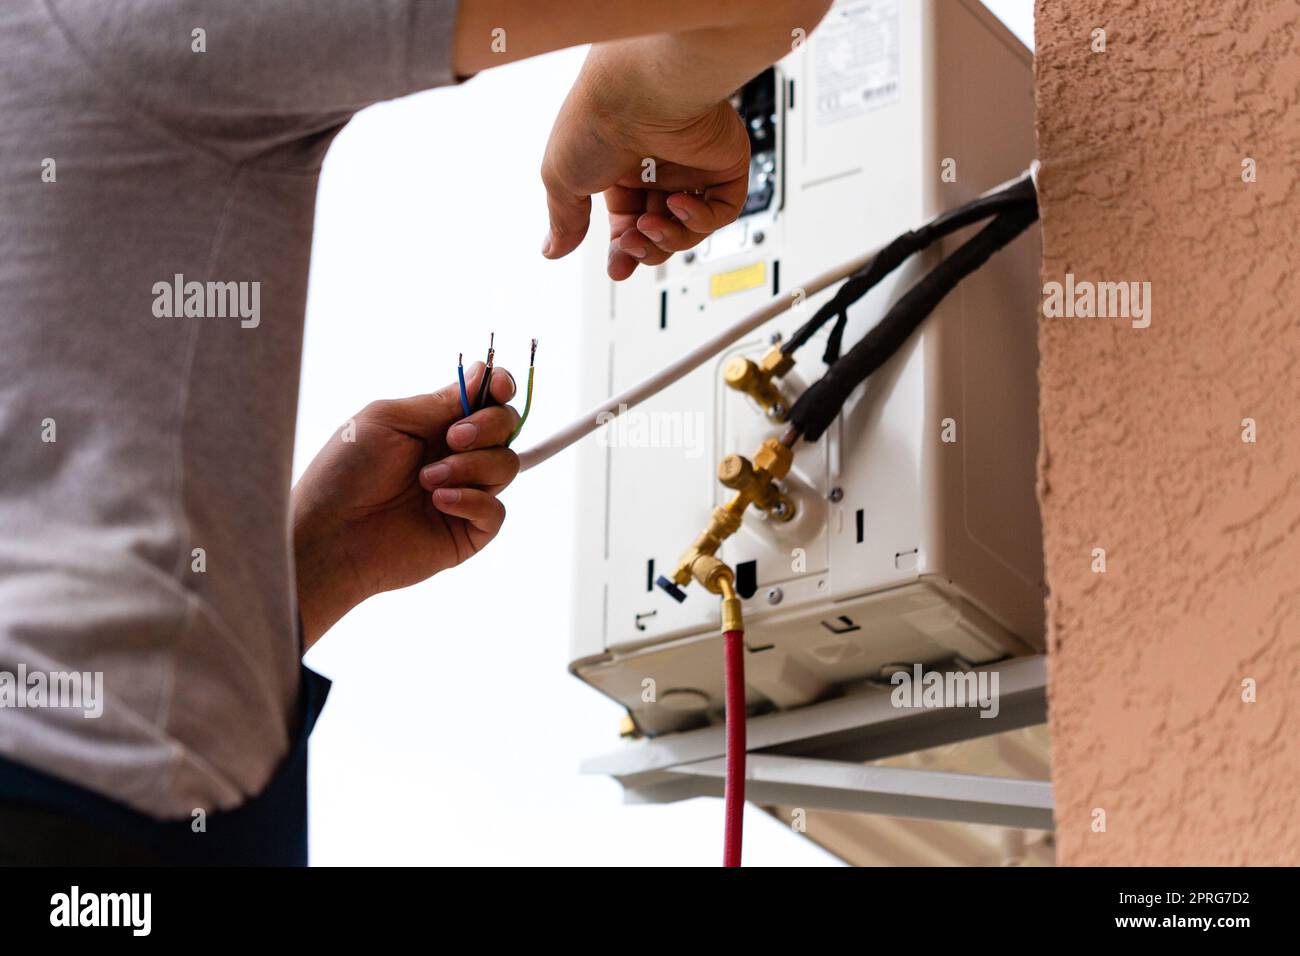 Male worker connects electrical wires during installation of air conditioner. Stock Photo